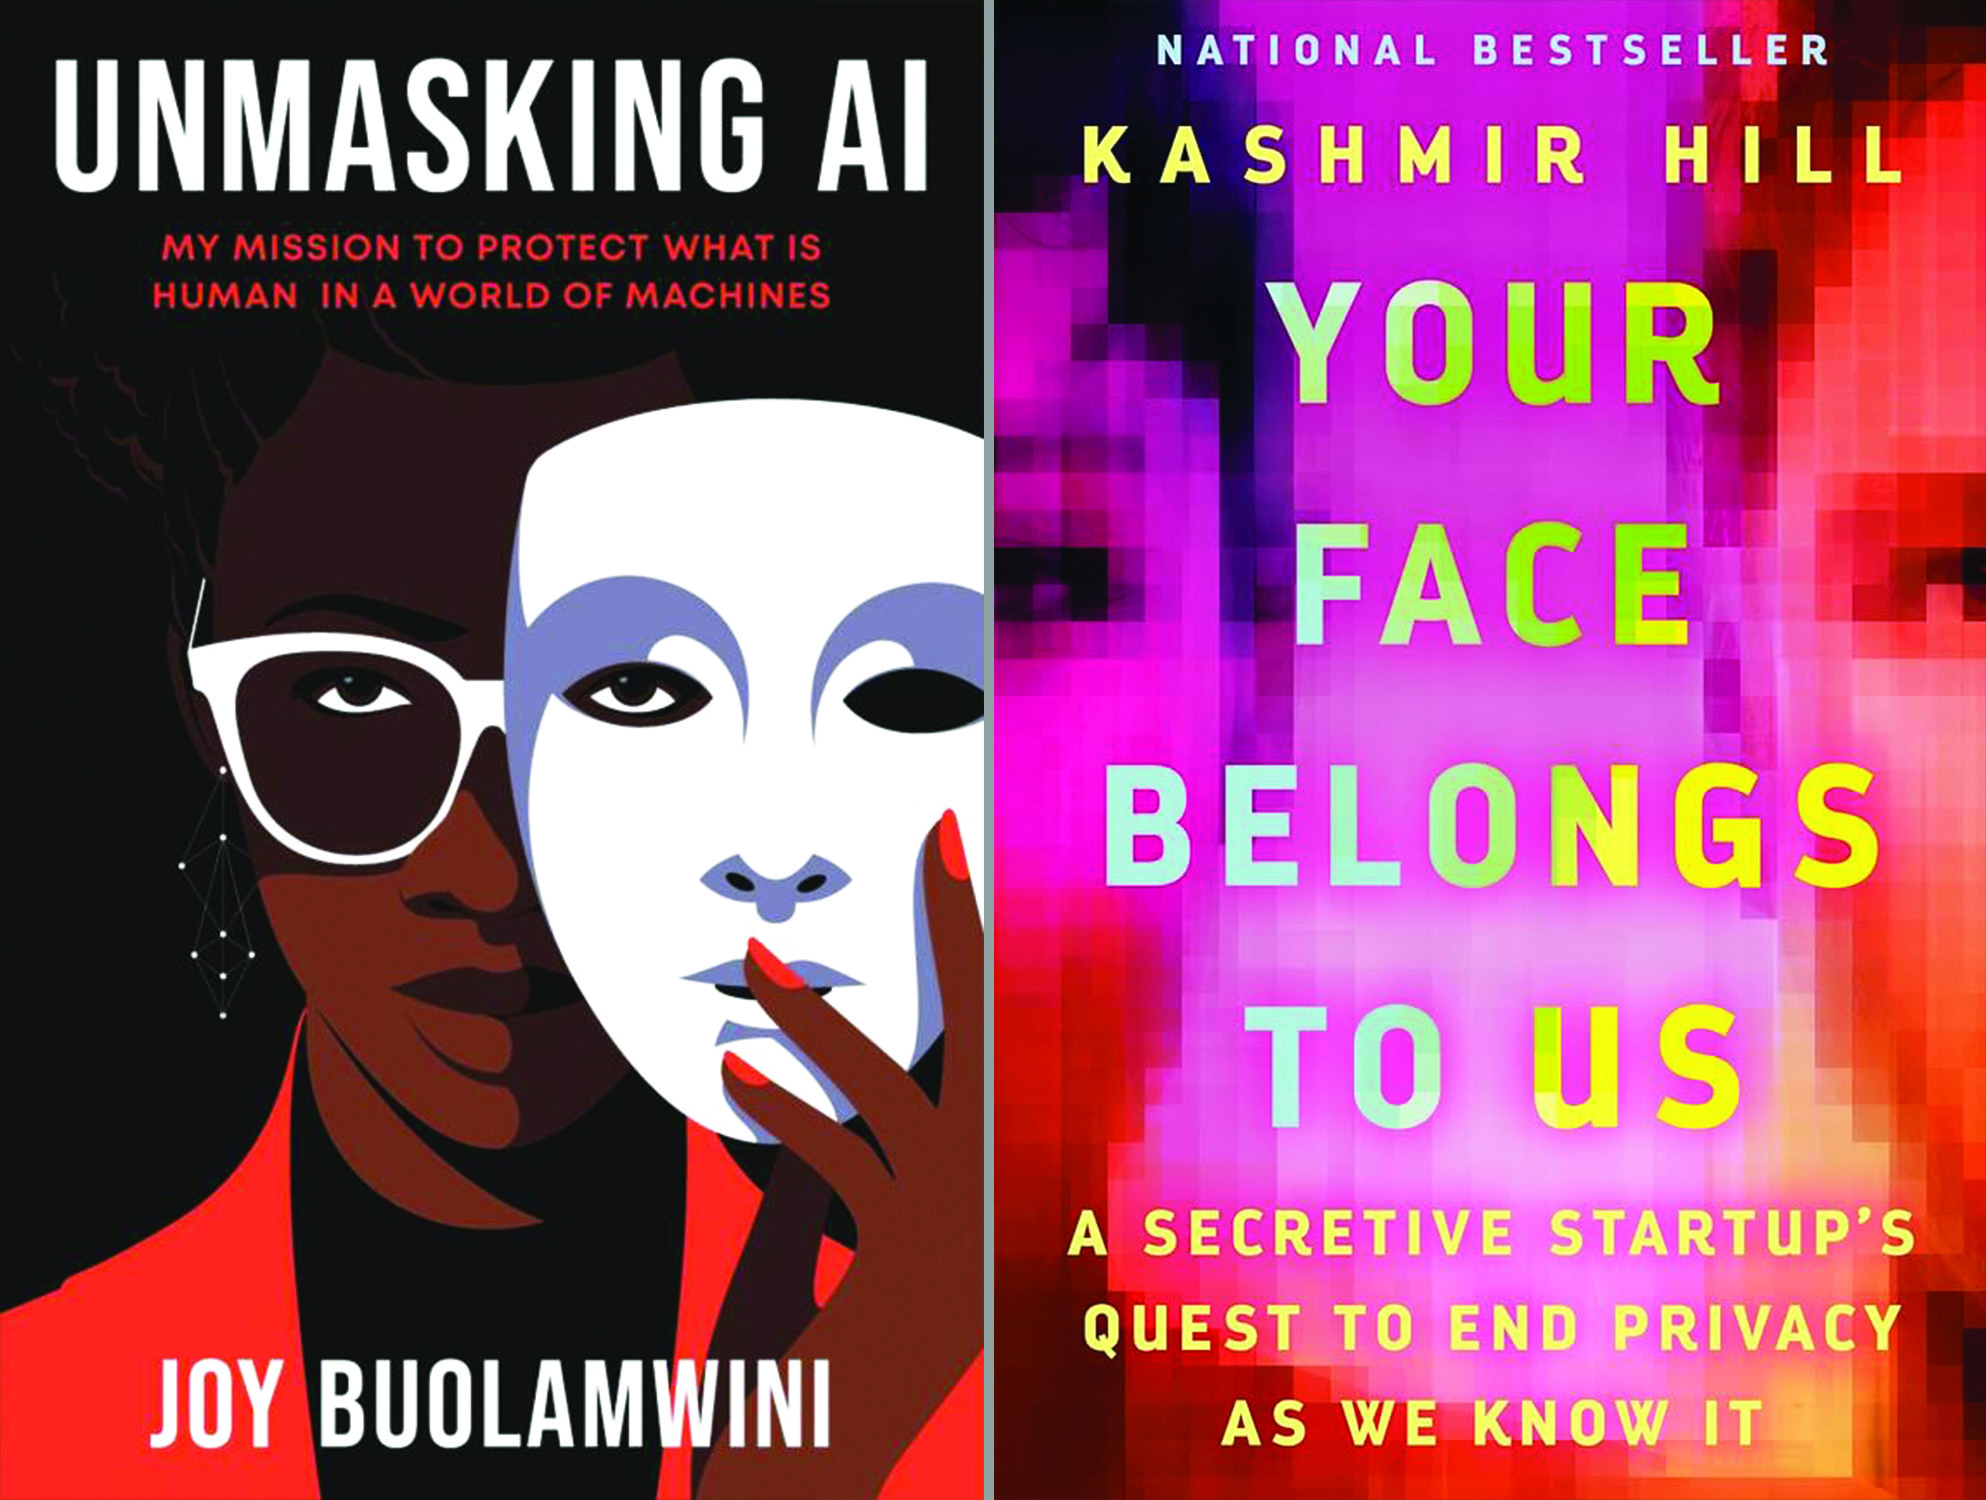 &lt;em&gt;Unmasking AI: My Mission to Protect What is Human in a World of Machines.&lt;/em&gt; By Joy Buolamwini. &lt;em&gt;Your Face Belongs to Us: A Secretive Startup’s Quest to End Privacy as We Know It.&lt;/em&gt; By Kashmir Hill. Images courtesy of Random House.